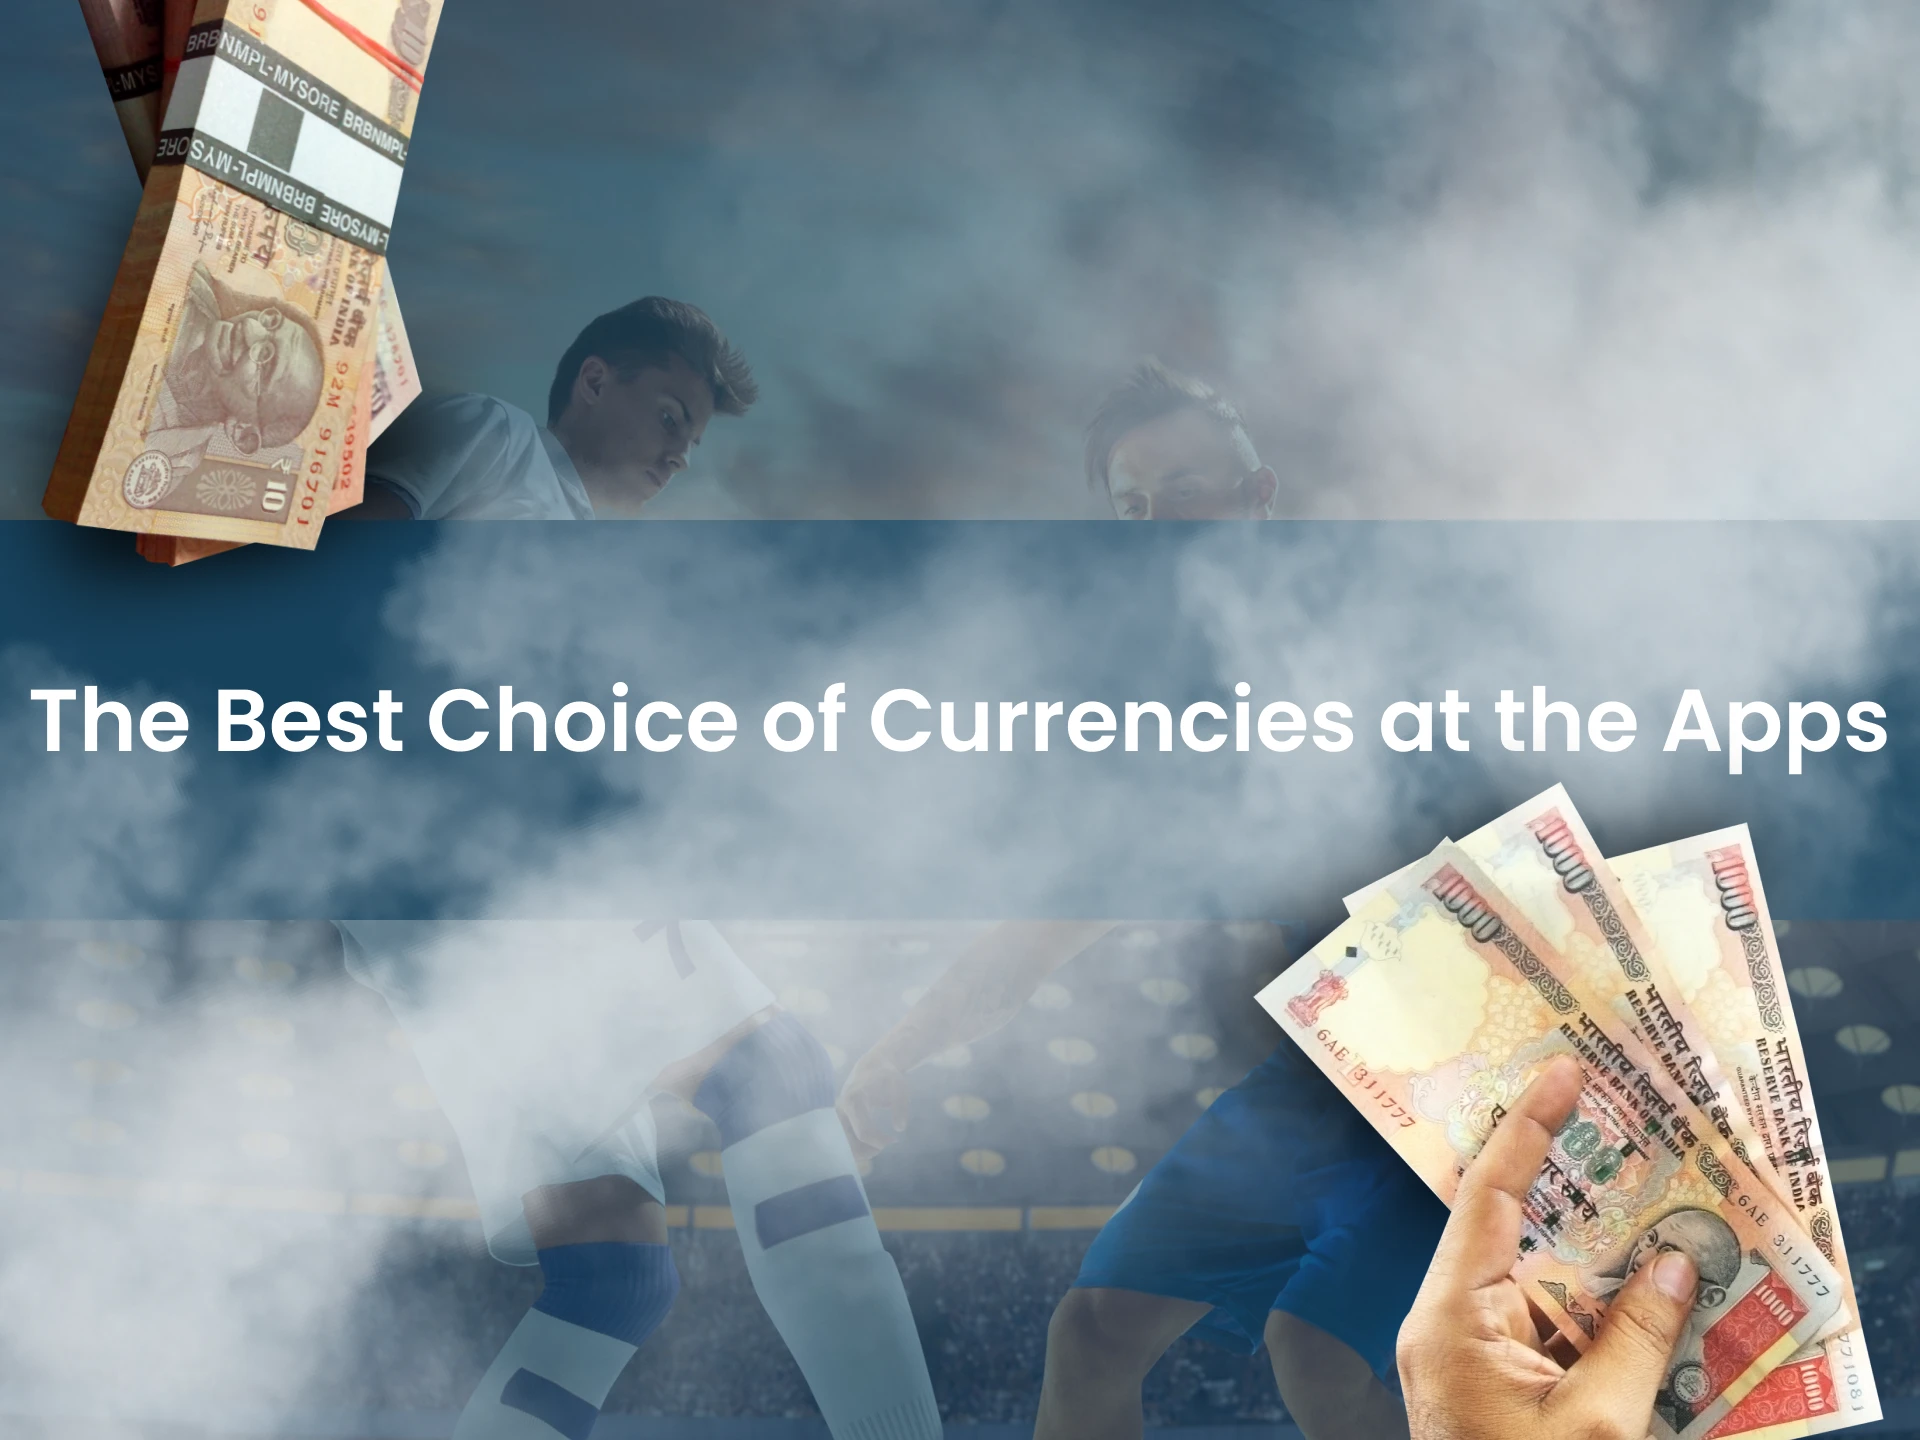 There is a list of the most popular currencies in the apps.